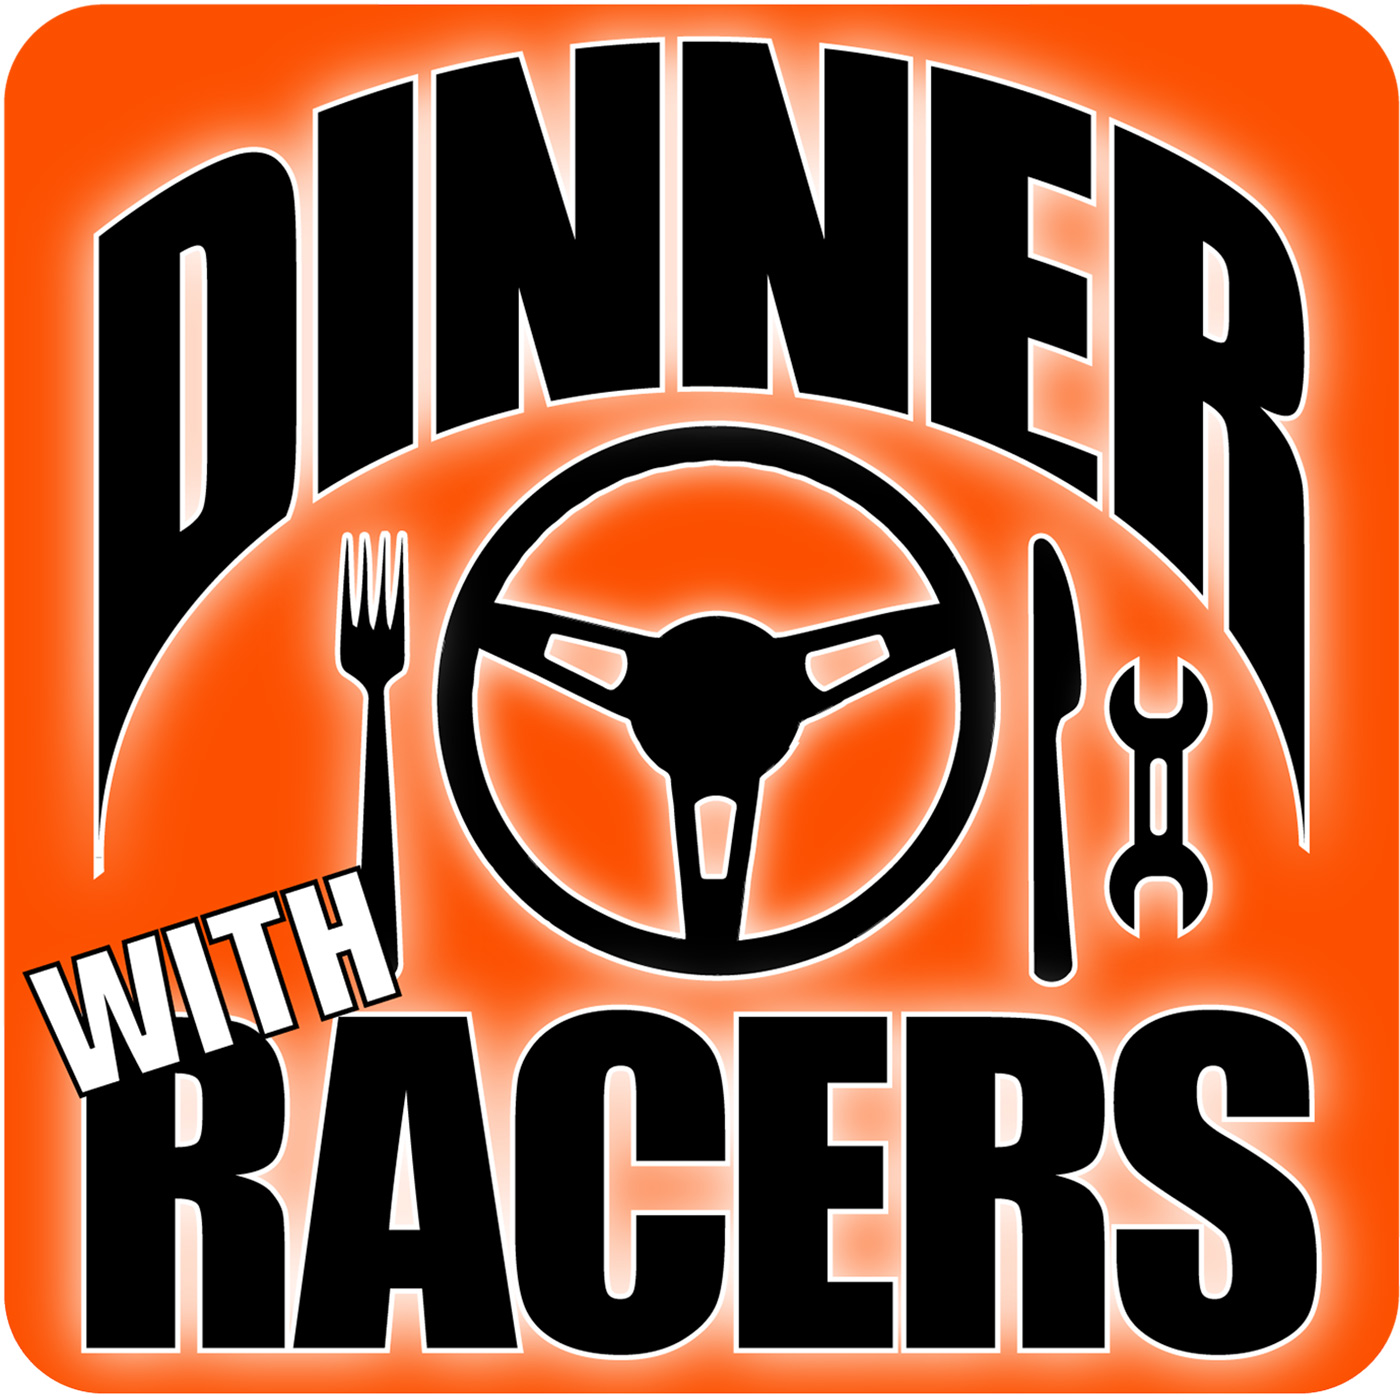 Dinner with Racers:Dinner with Racers